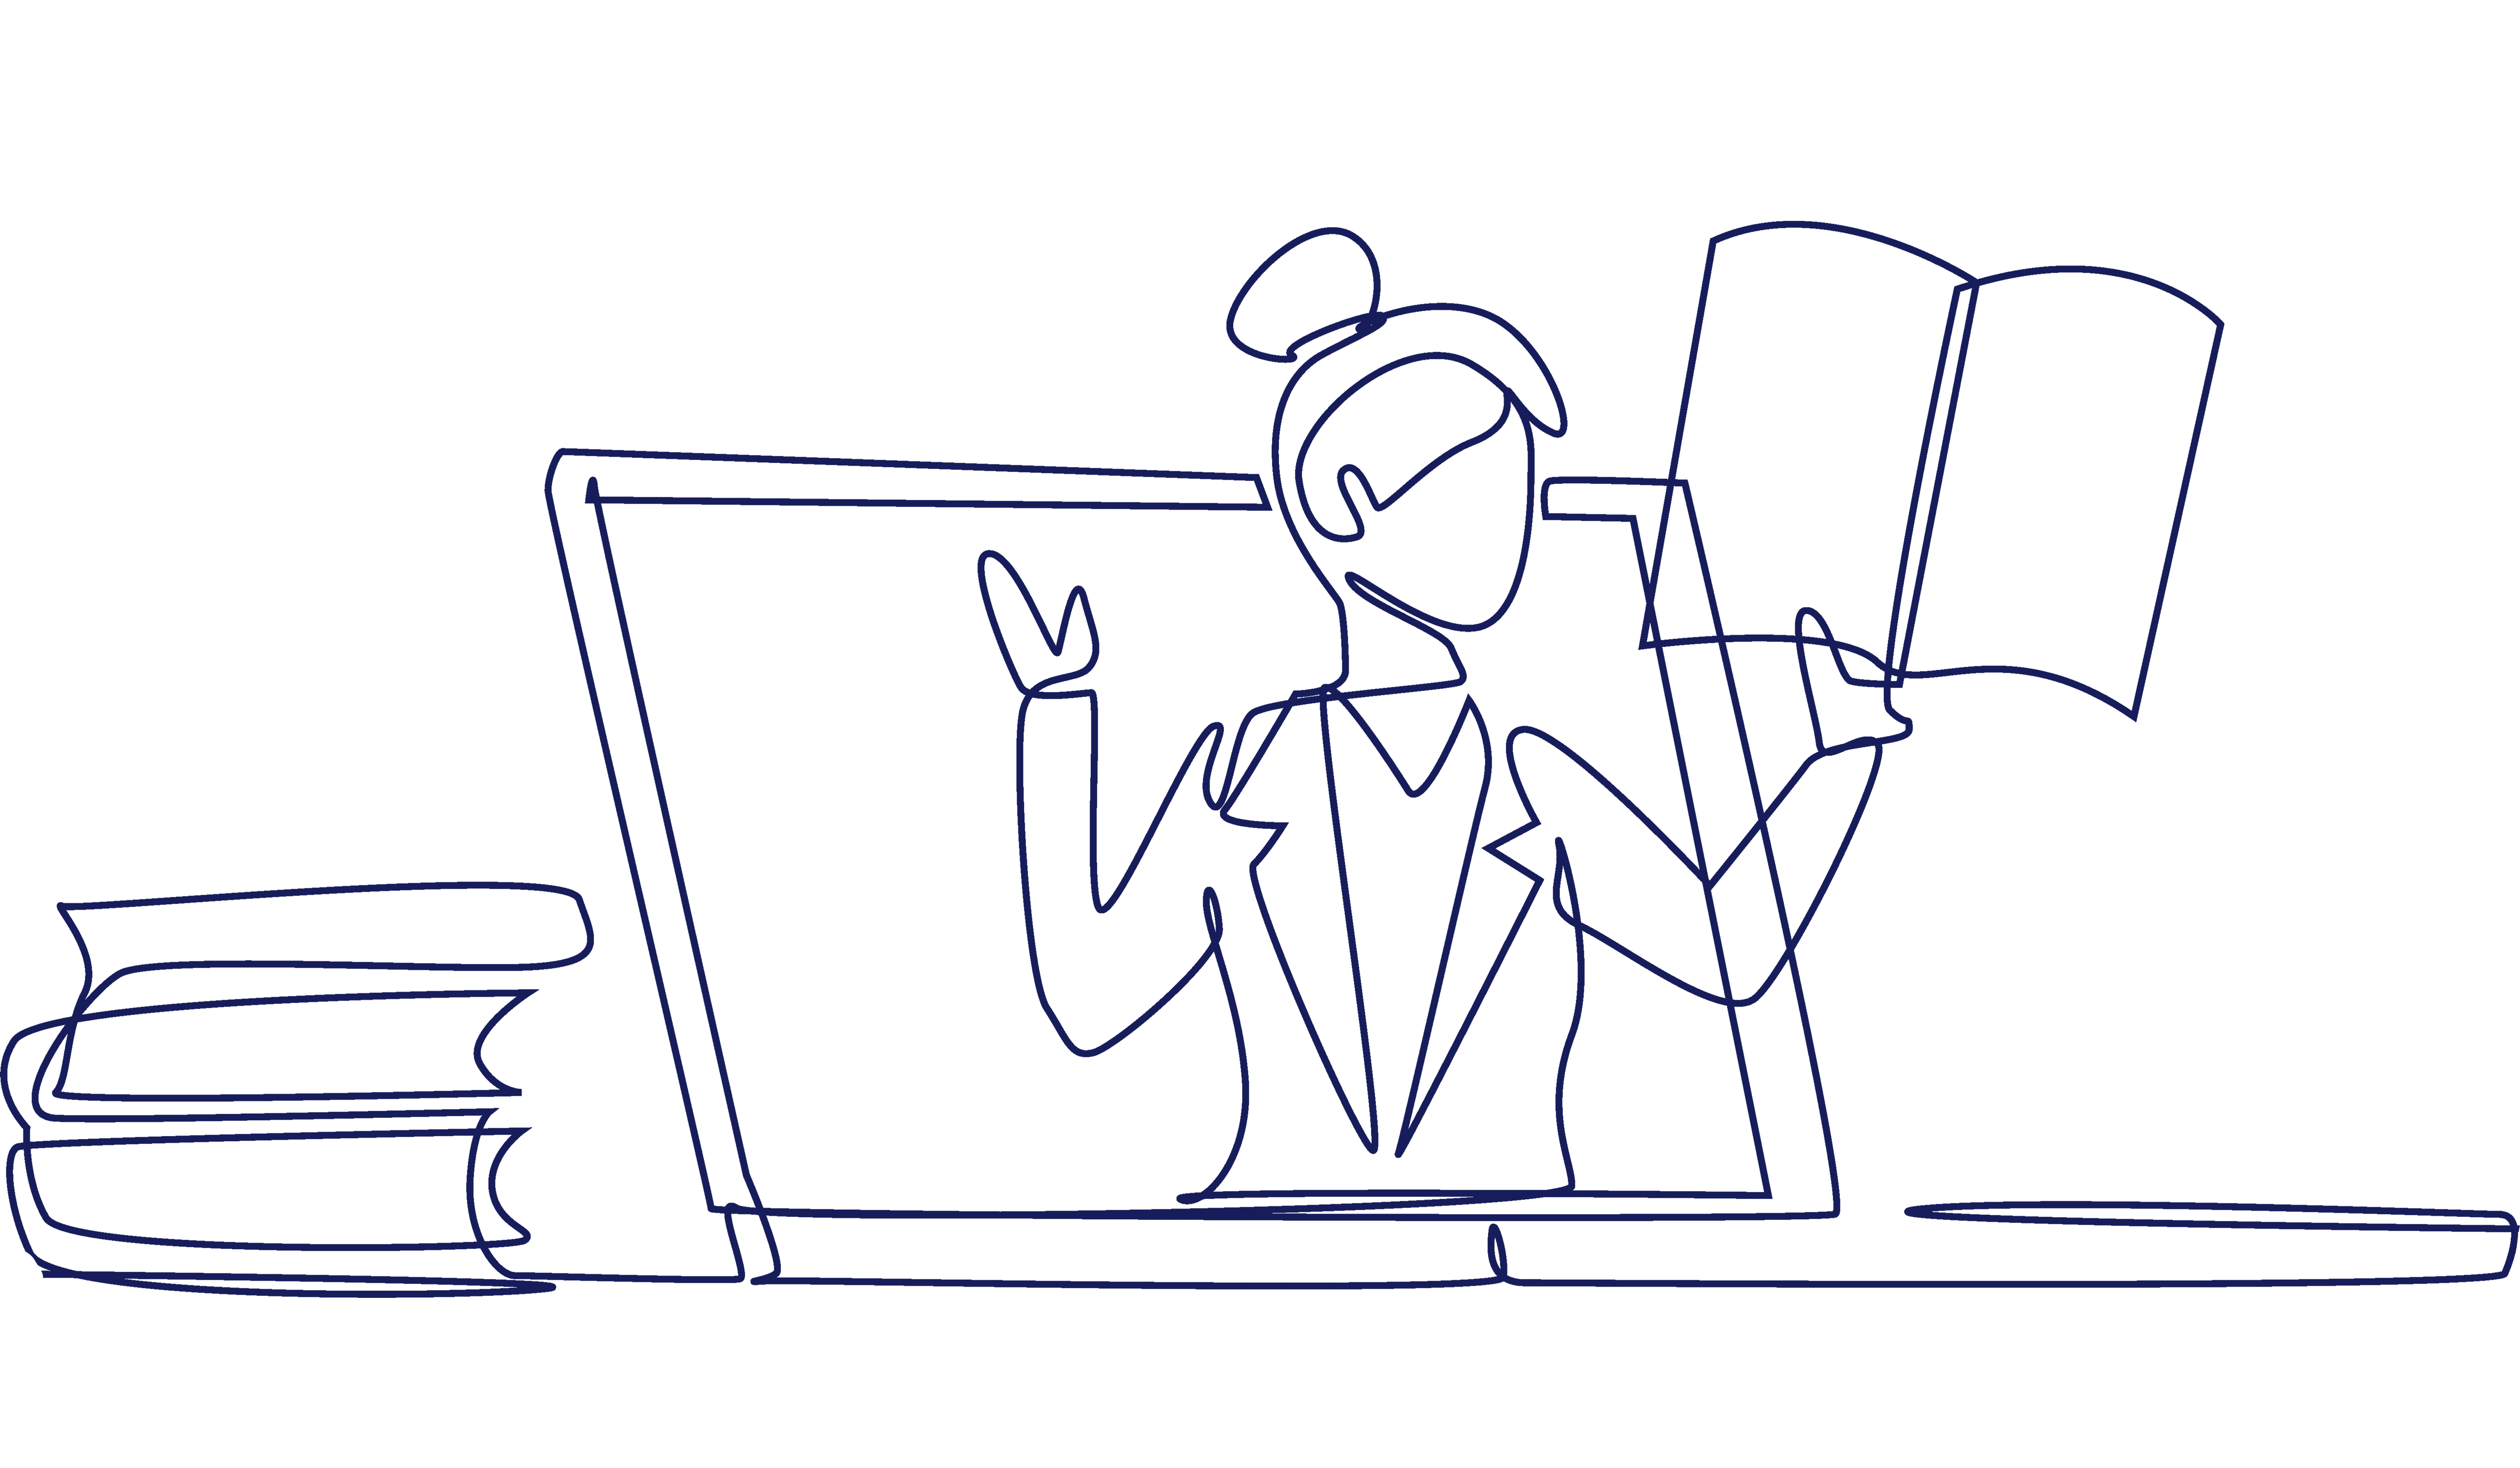 Cartoon drawing of a teacher in a laptop holding a book speaking outloud.